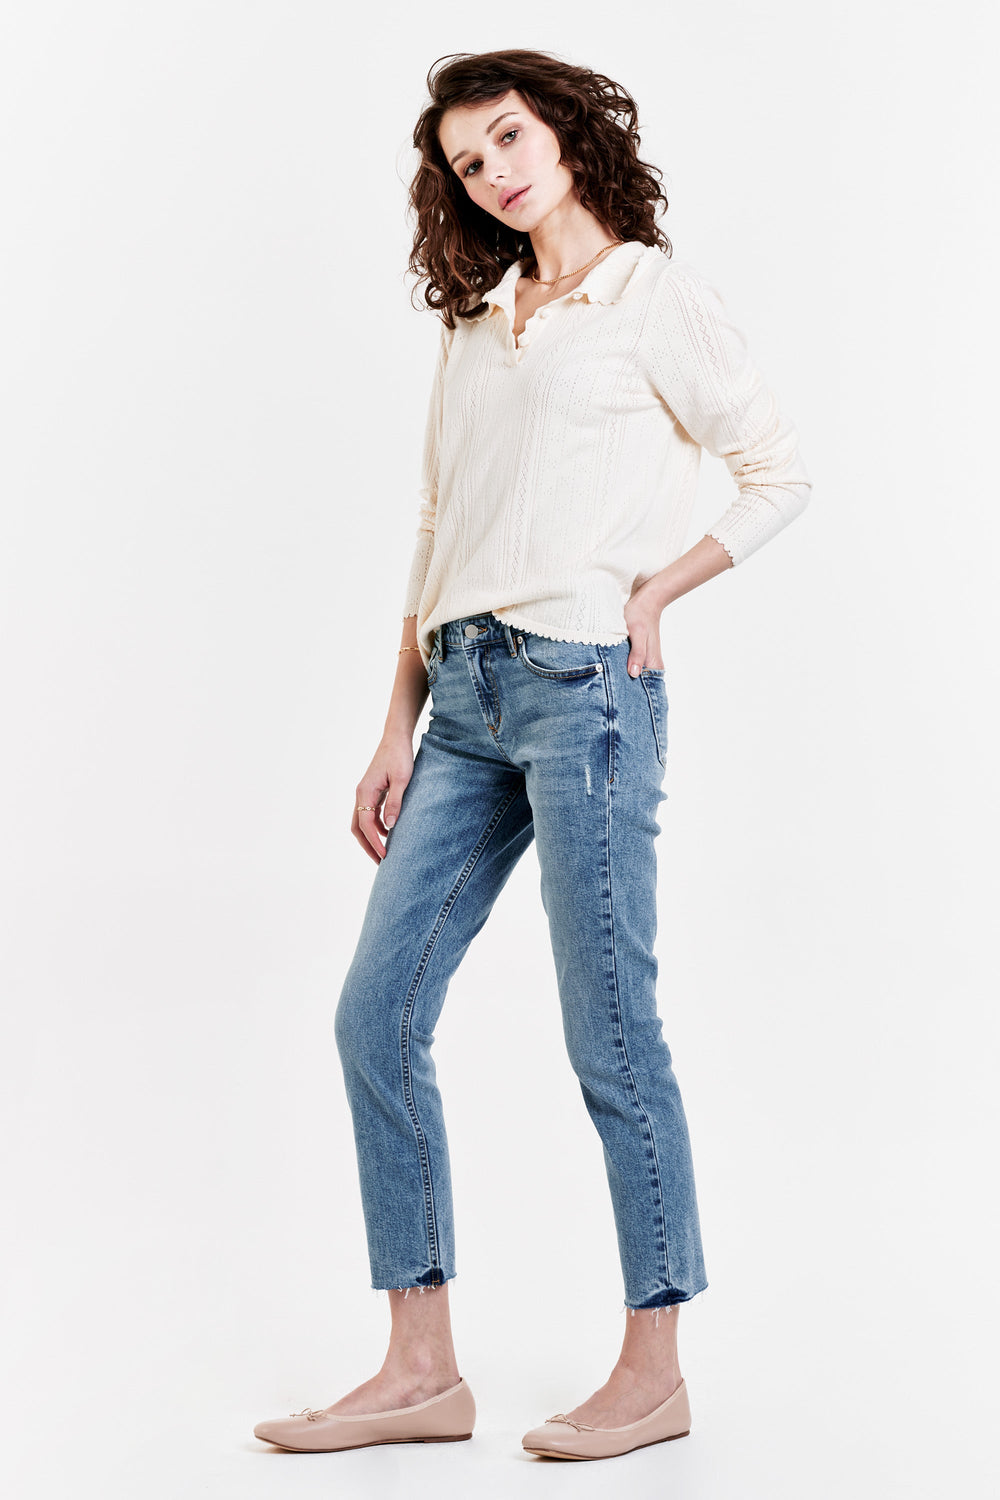 image of a female model wearing a ELIZABETH BUTTON FRONT HENLEY CREAM TOPS